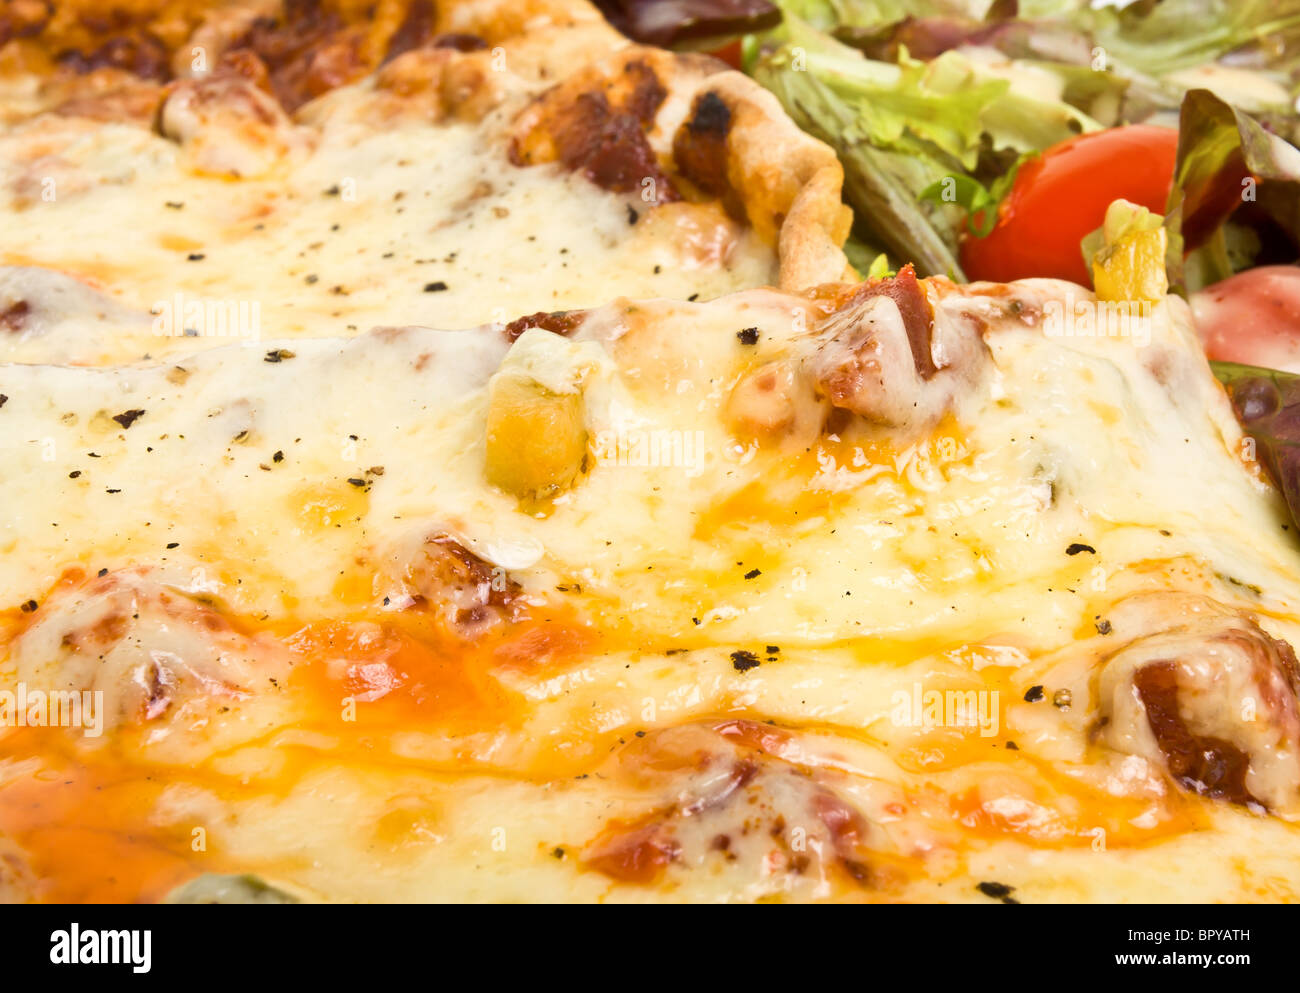 Vibrant tasty looking home made pizza and salad with dressing. Stock Photo